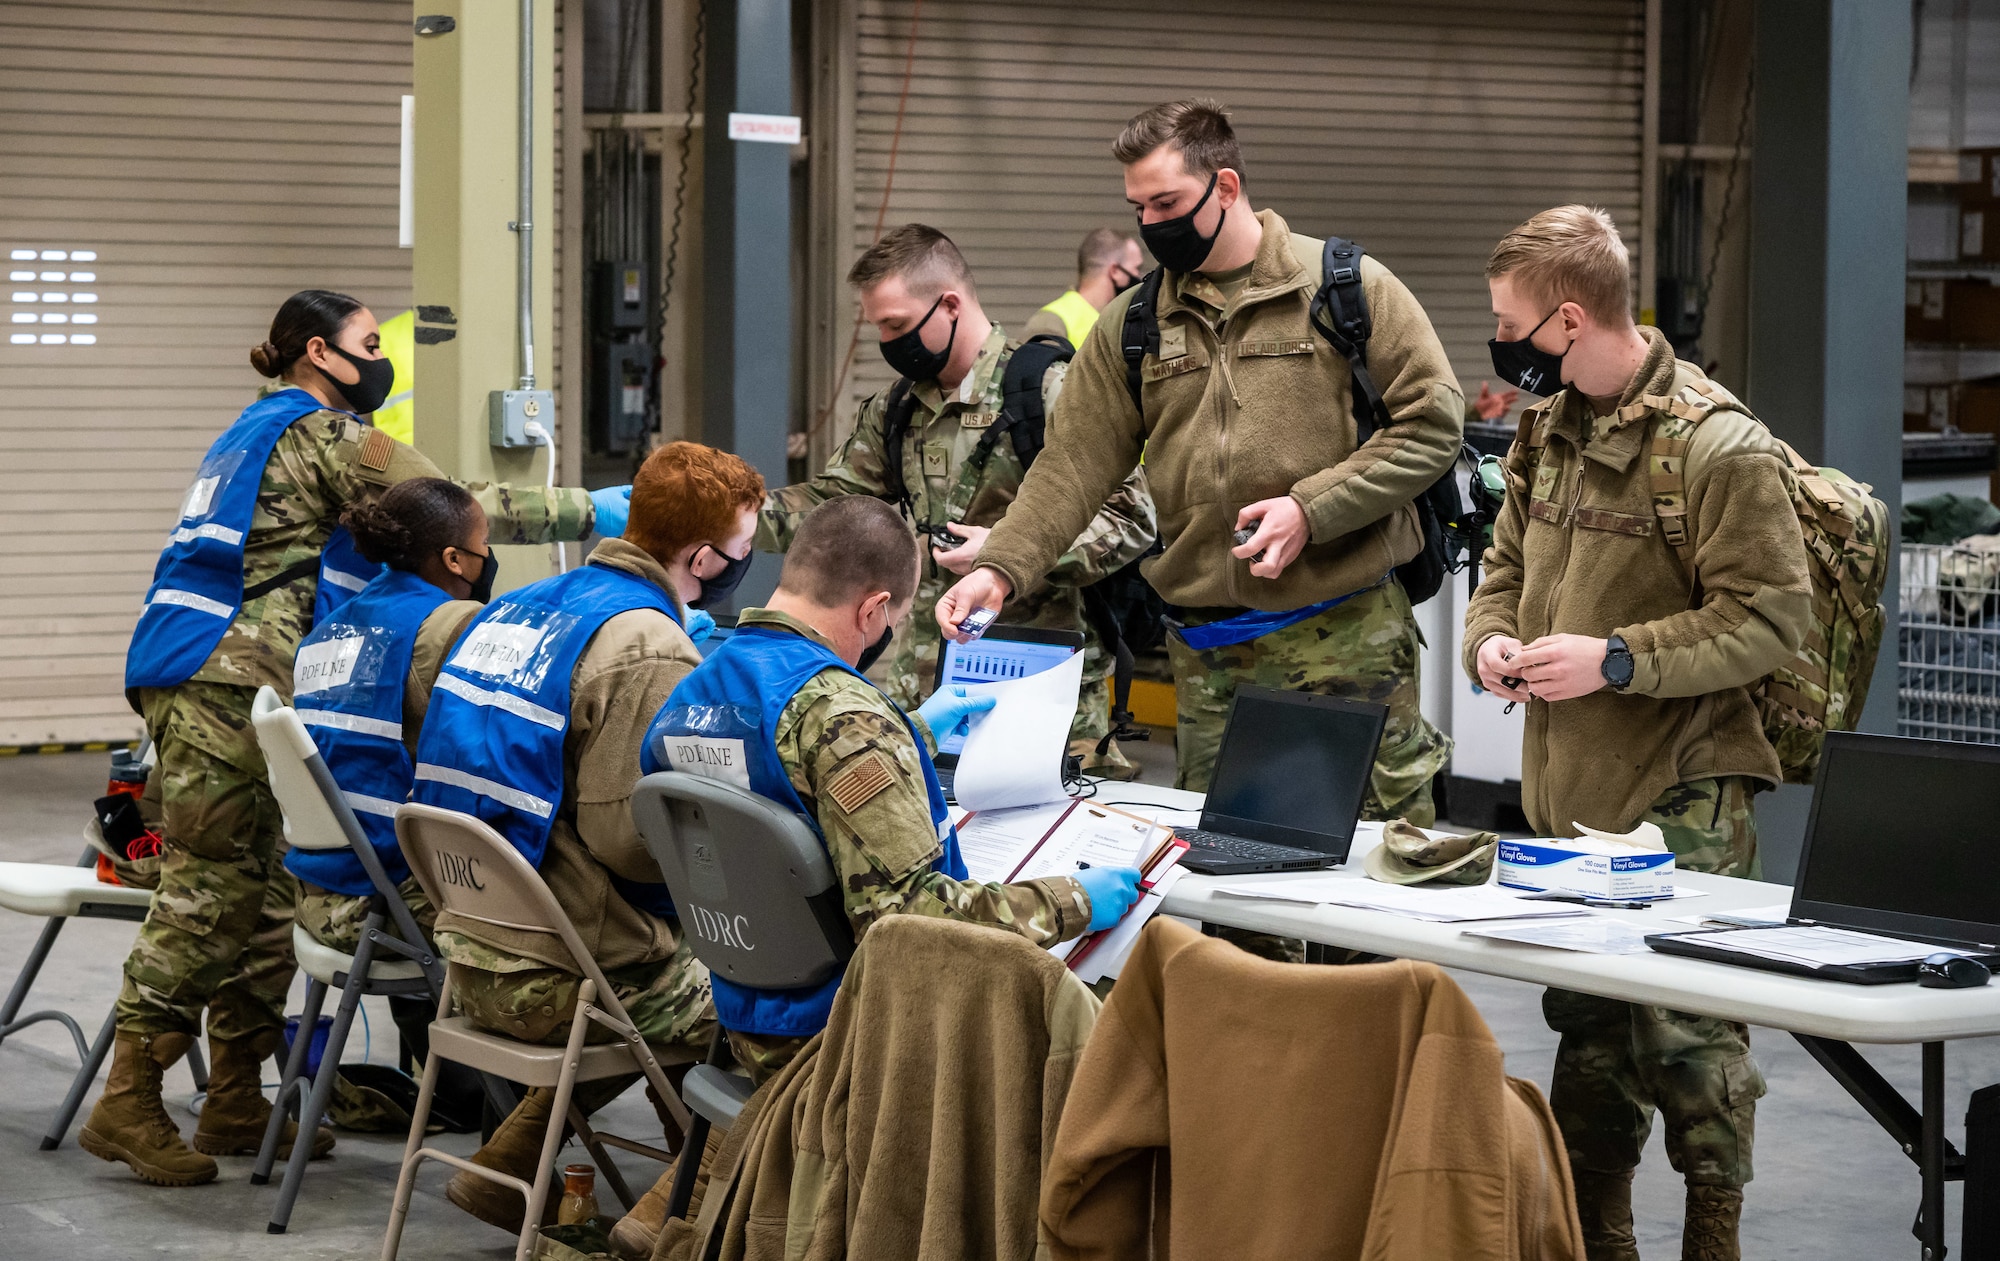 Team Dover members process through a personnel deployment function line during the Liberty Eagle Readiness Exercise on Dover Air Force Base, Delaware, Feb. 17, 2021. The exercise evaluated Team Dover’s ability to rapidly deploy Airmen, Guardians and equipment with limited notice. (U.S. Air Force photo by Senior Airman Christopher Quail)